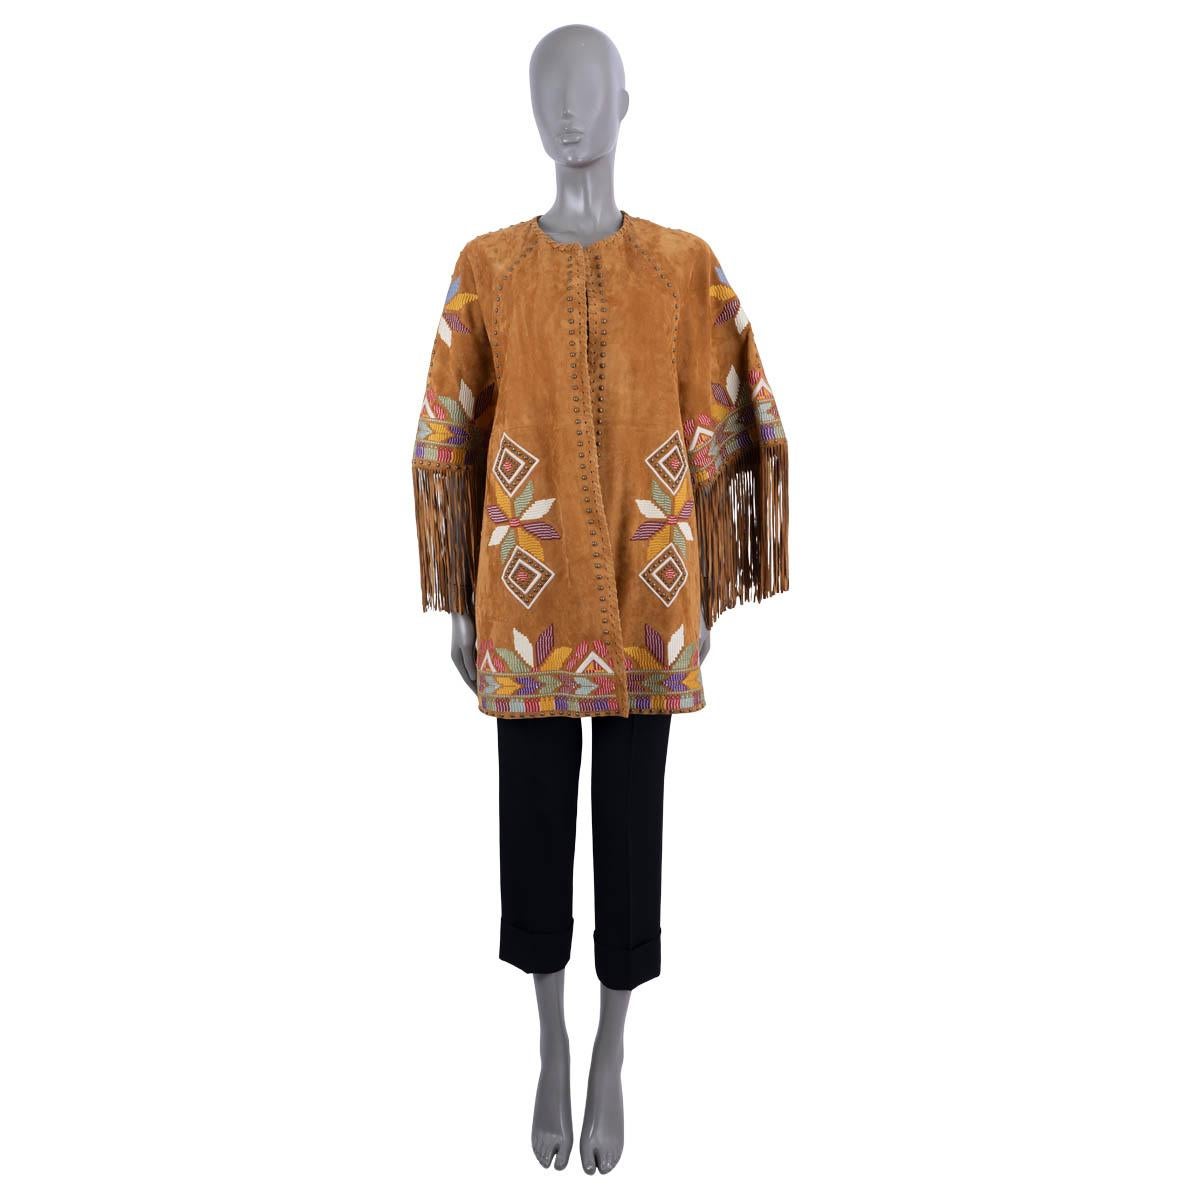 100% authentic Etro fringed jacket in amber goat skin suede. Features multicolored geometric  embroidery, an open front, short raglan sleeves and studded details along the hem, front and back. Lined in floral printed cotton (100%). Medium Weight.Has